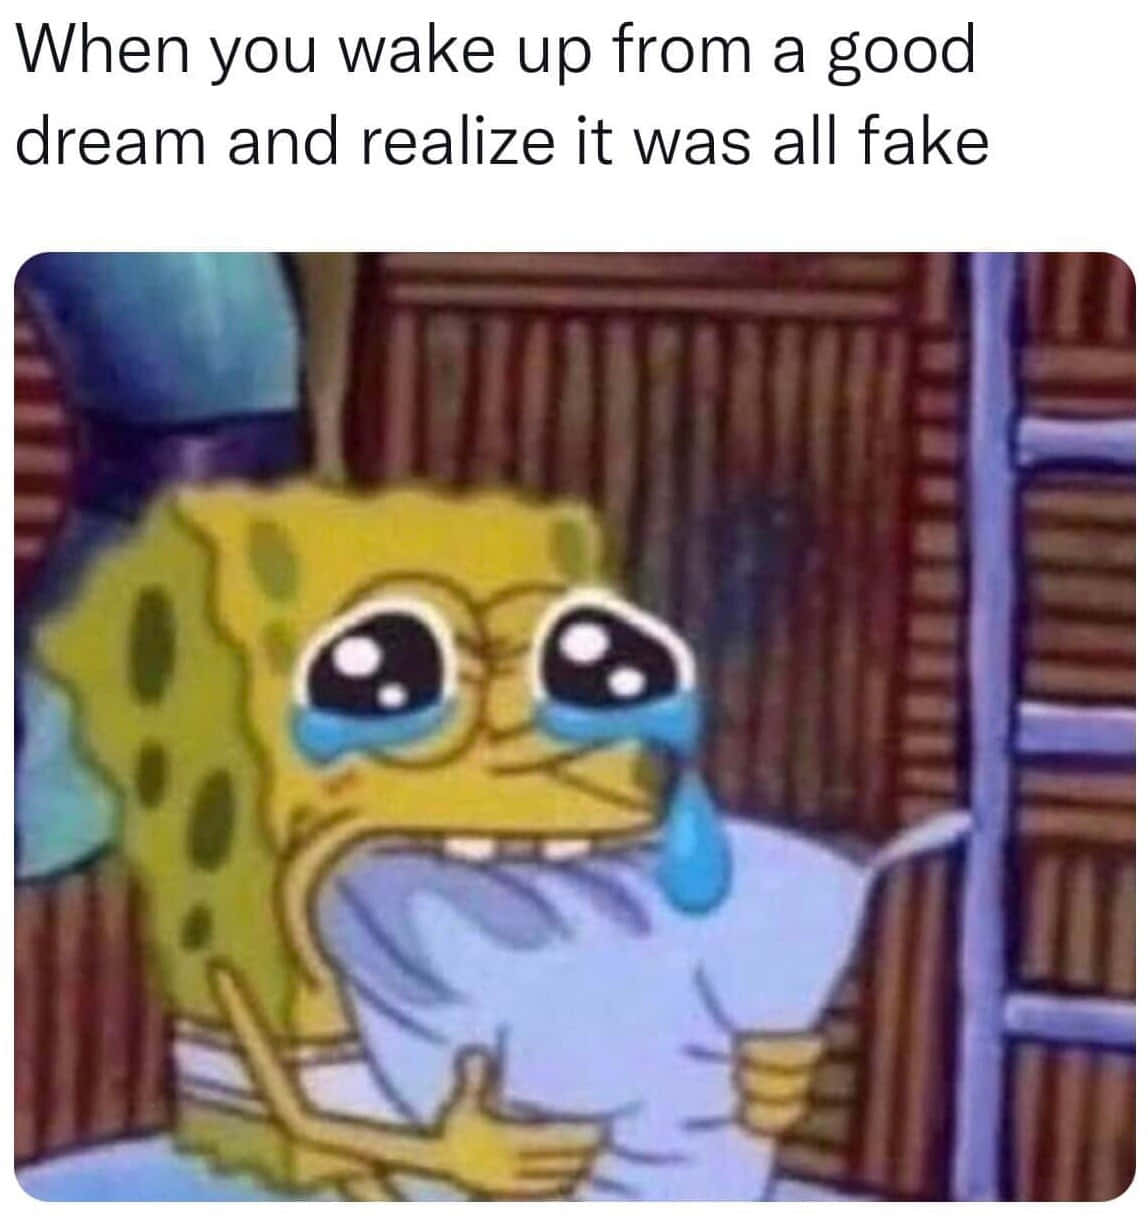 Spongebob With A Caption That Says When You Wake Up From A Good Dream And Realize It Was All Fake